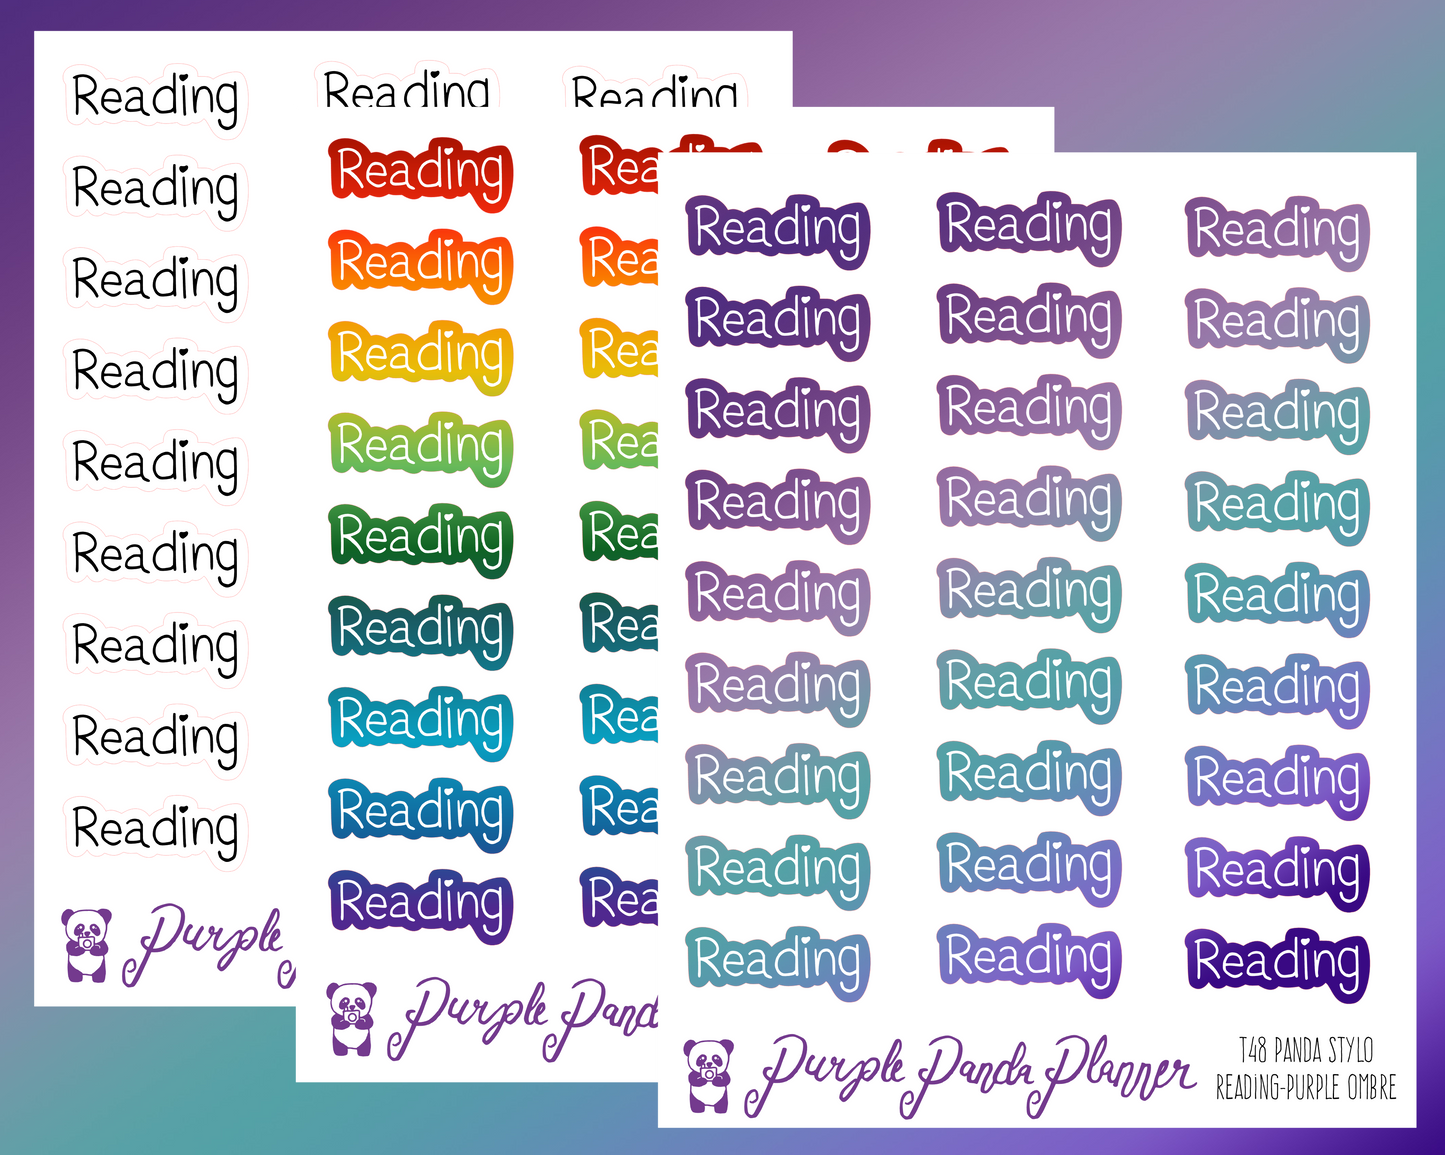 Reading (T48) - Panda Stylo Script - Black, Rainbow, or Purple Ombre - Stickers for Planner, Journal or Calendar